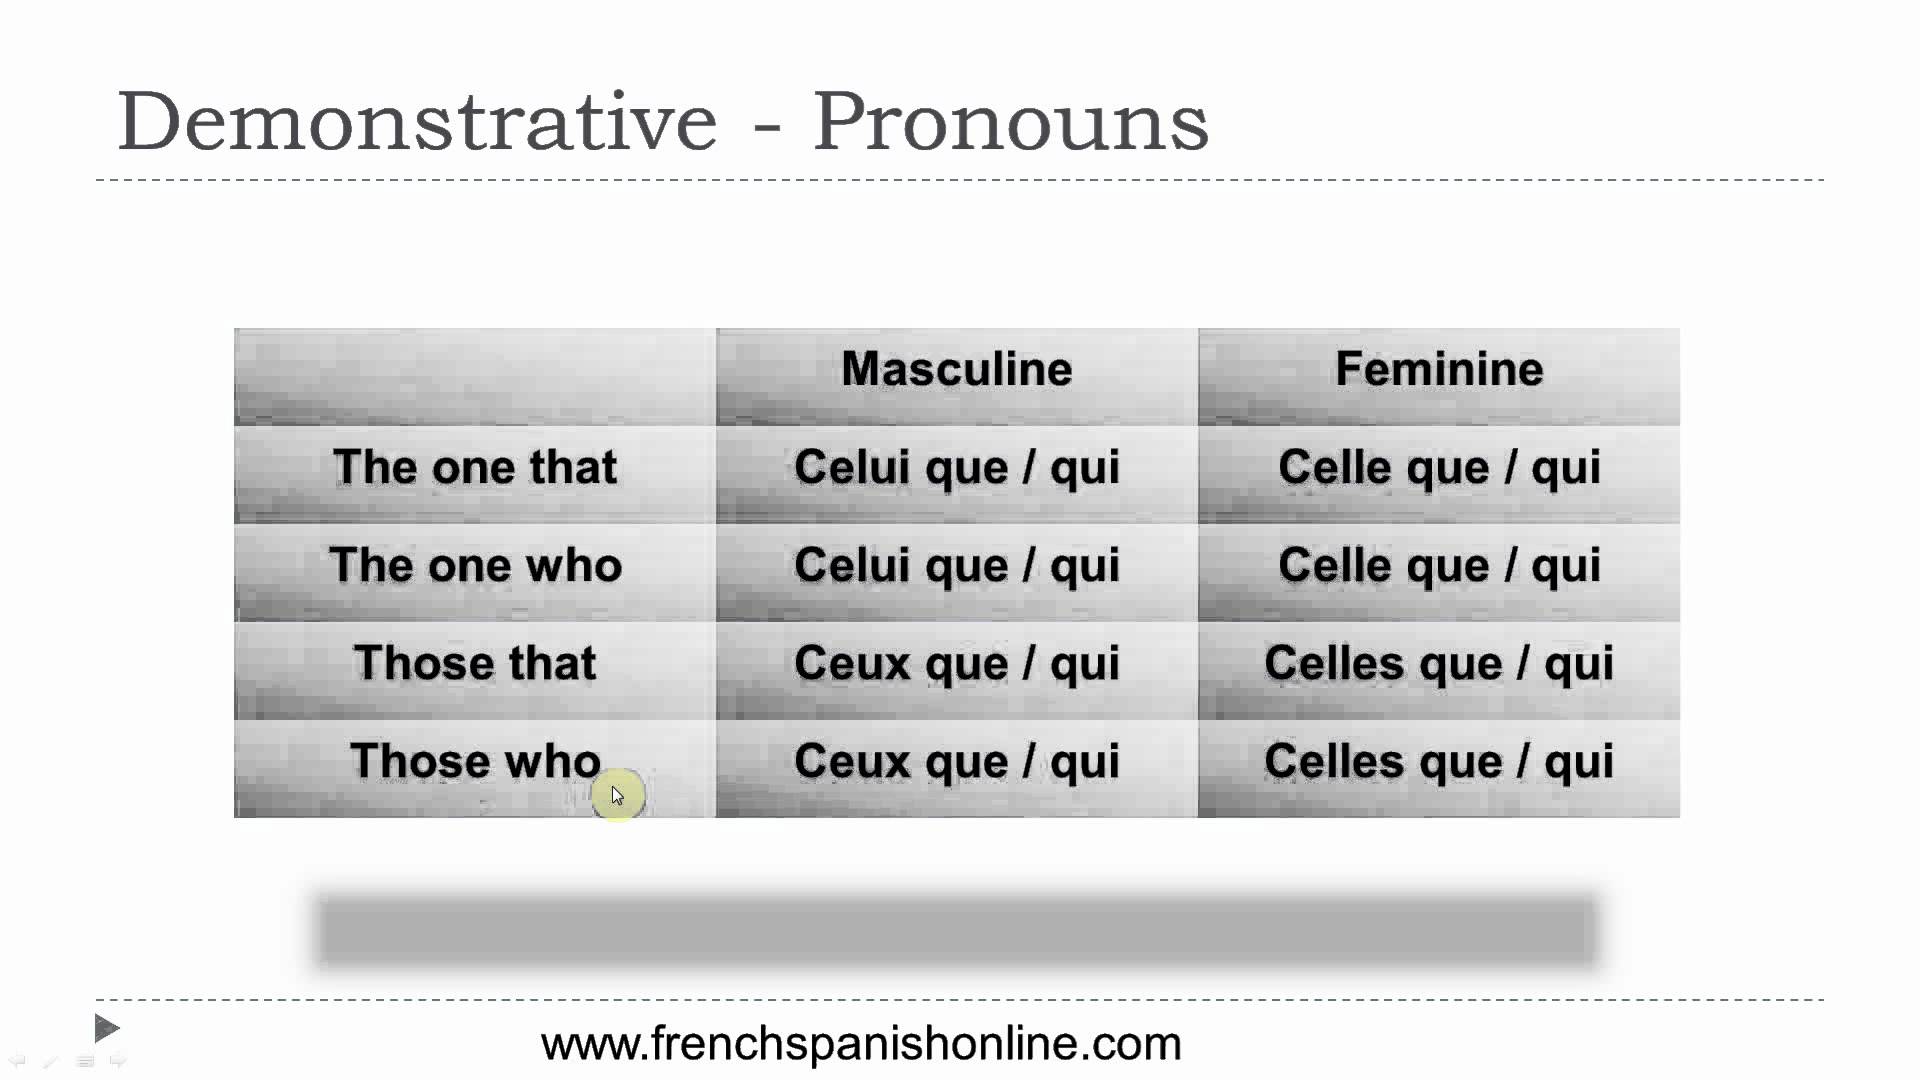 7-best-images-of-demonstrative-pronouns-in-spanish-worksheet-2nd